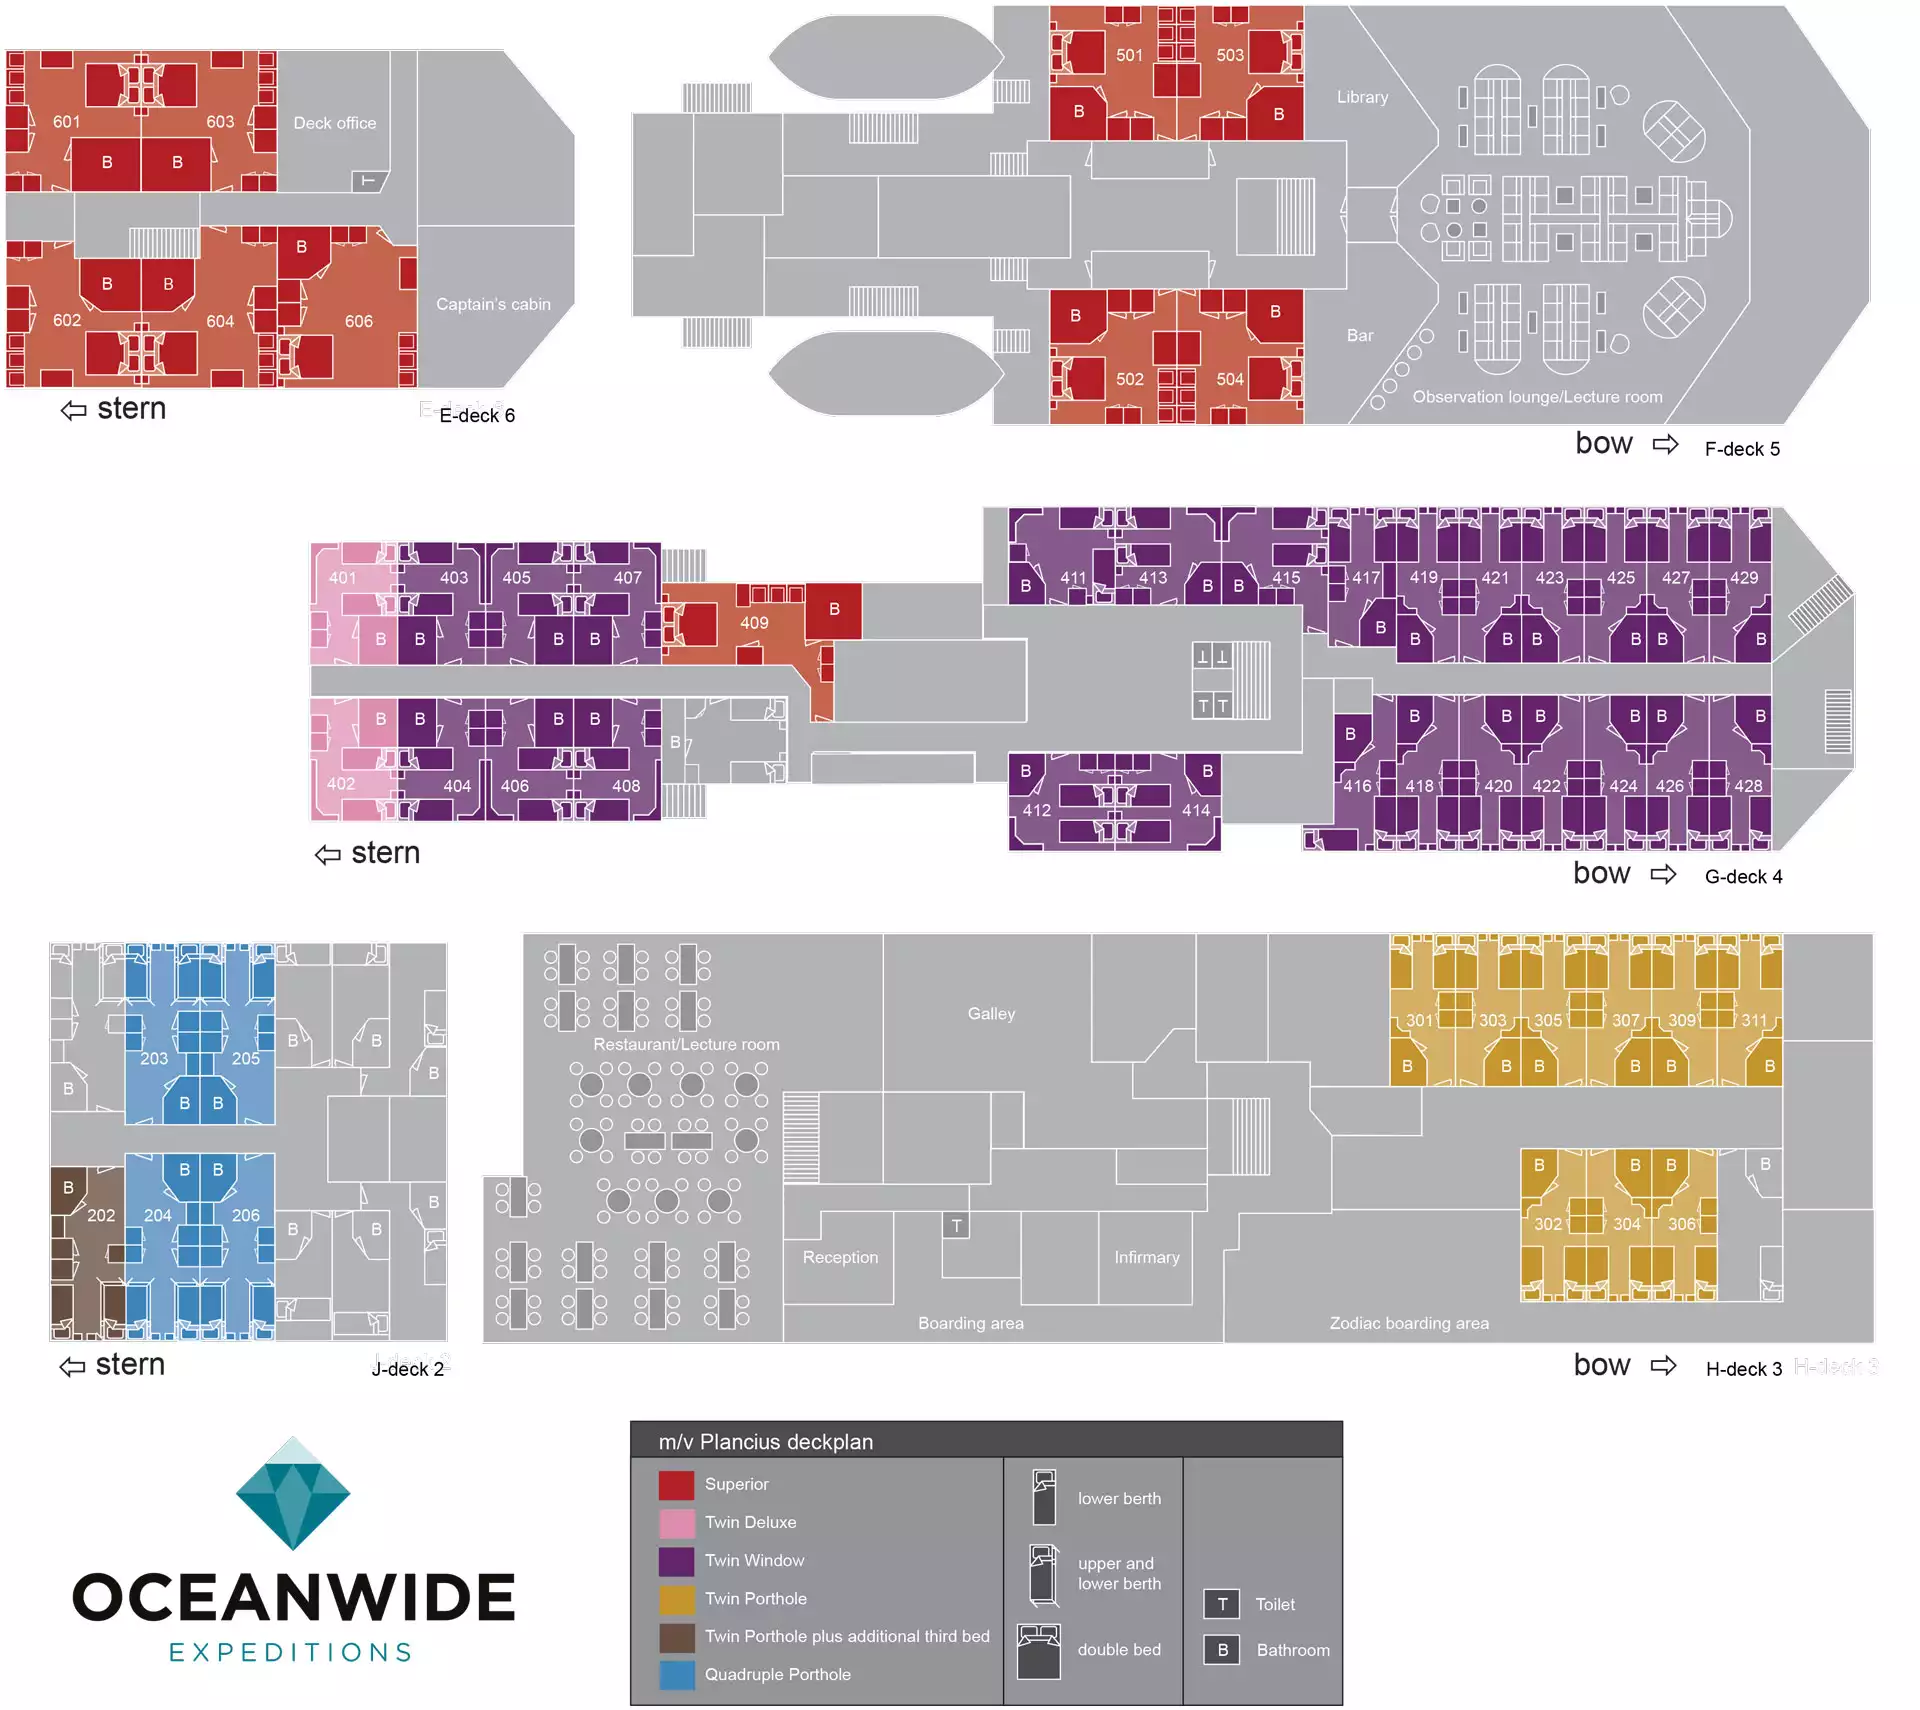 Plancius deck plan showing 50 color-coded cabins over 4 passenger decks plus social areas such as the Observation Lounge.